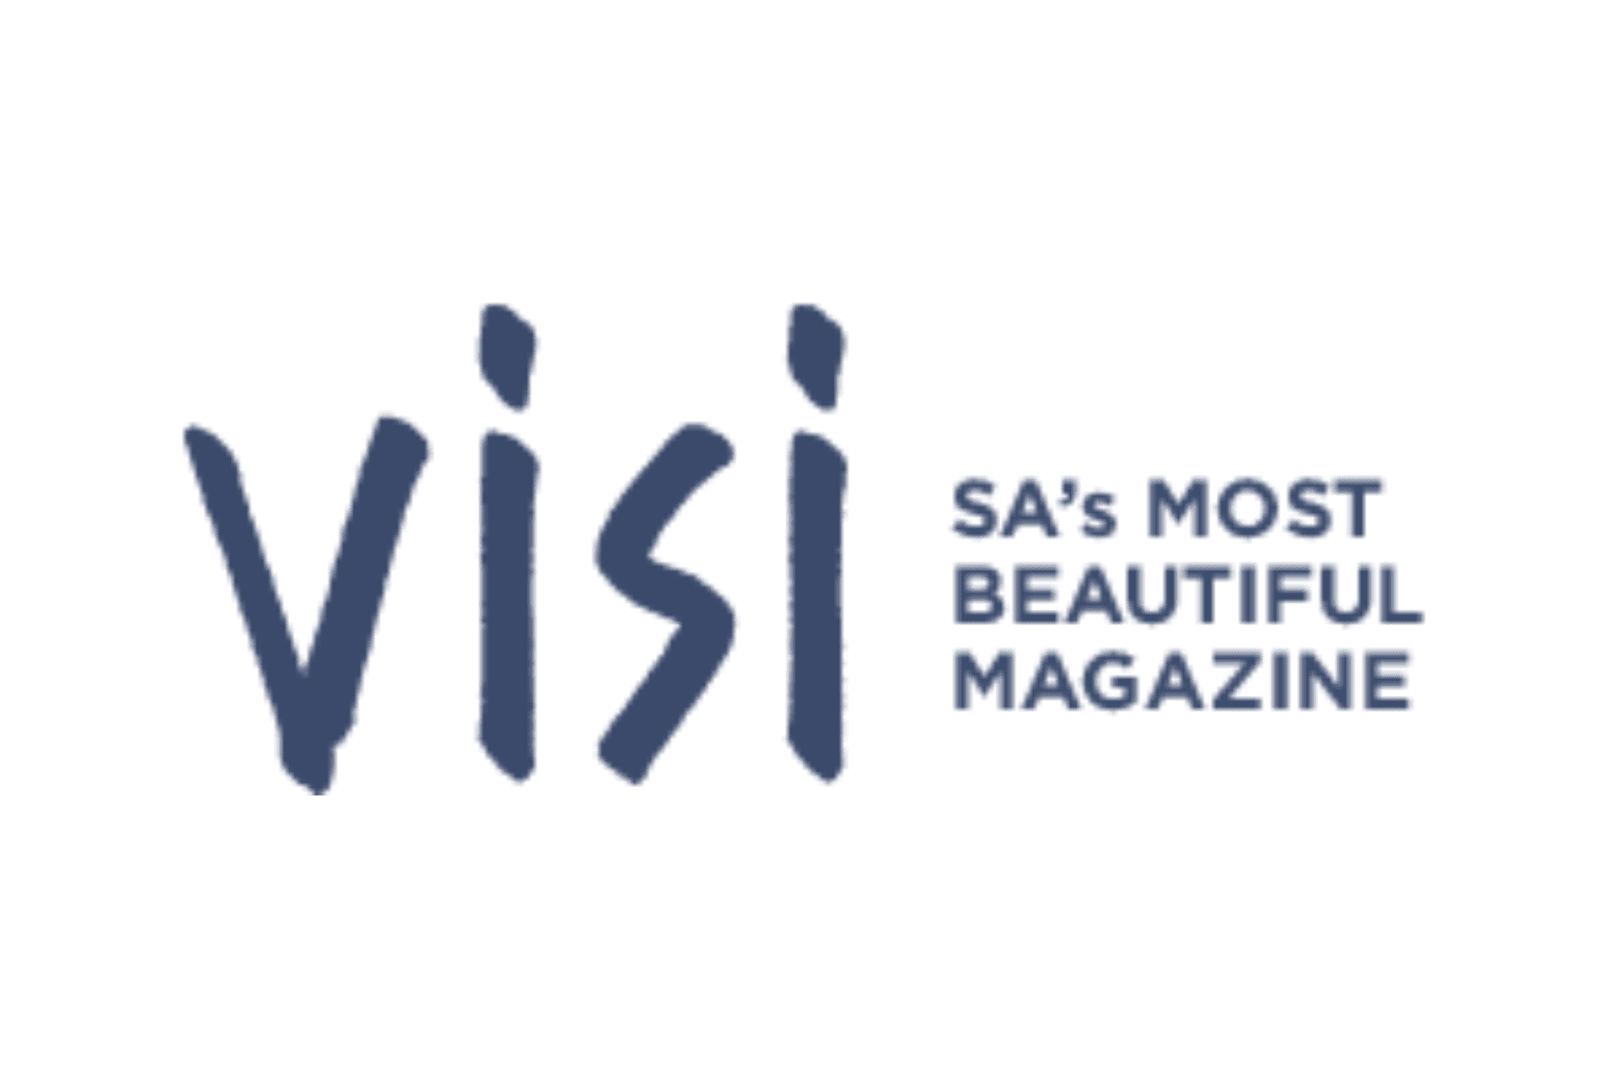 The Secret Love Project has been featured in Visi publications